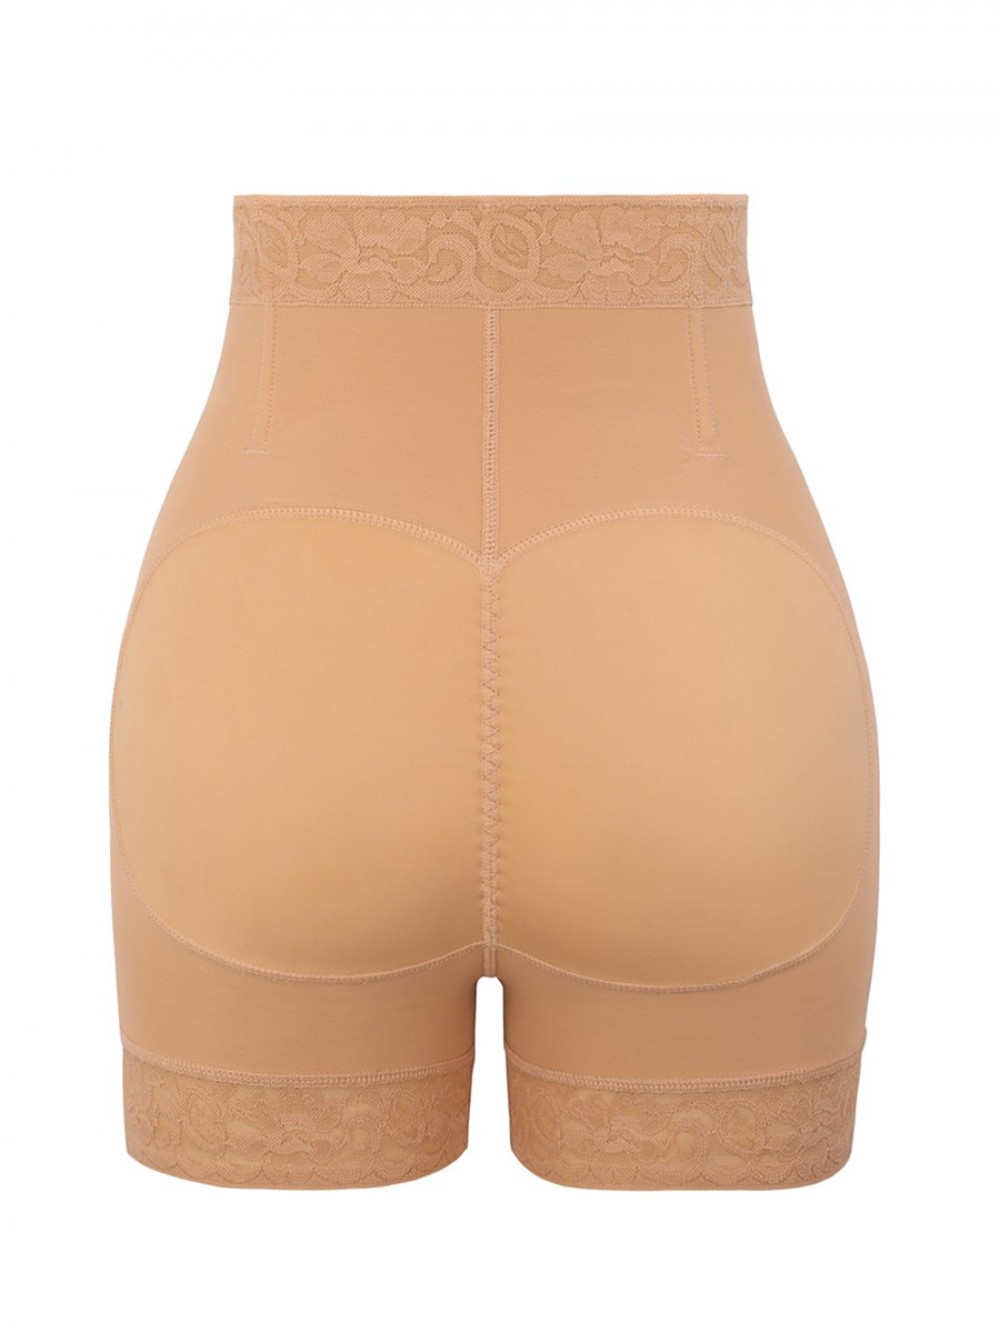 Deep Nude Butt Lifter With Front Zipper Lace Trim Smooth Abdomen